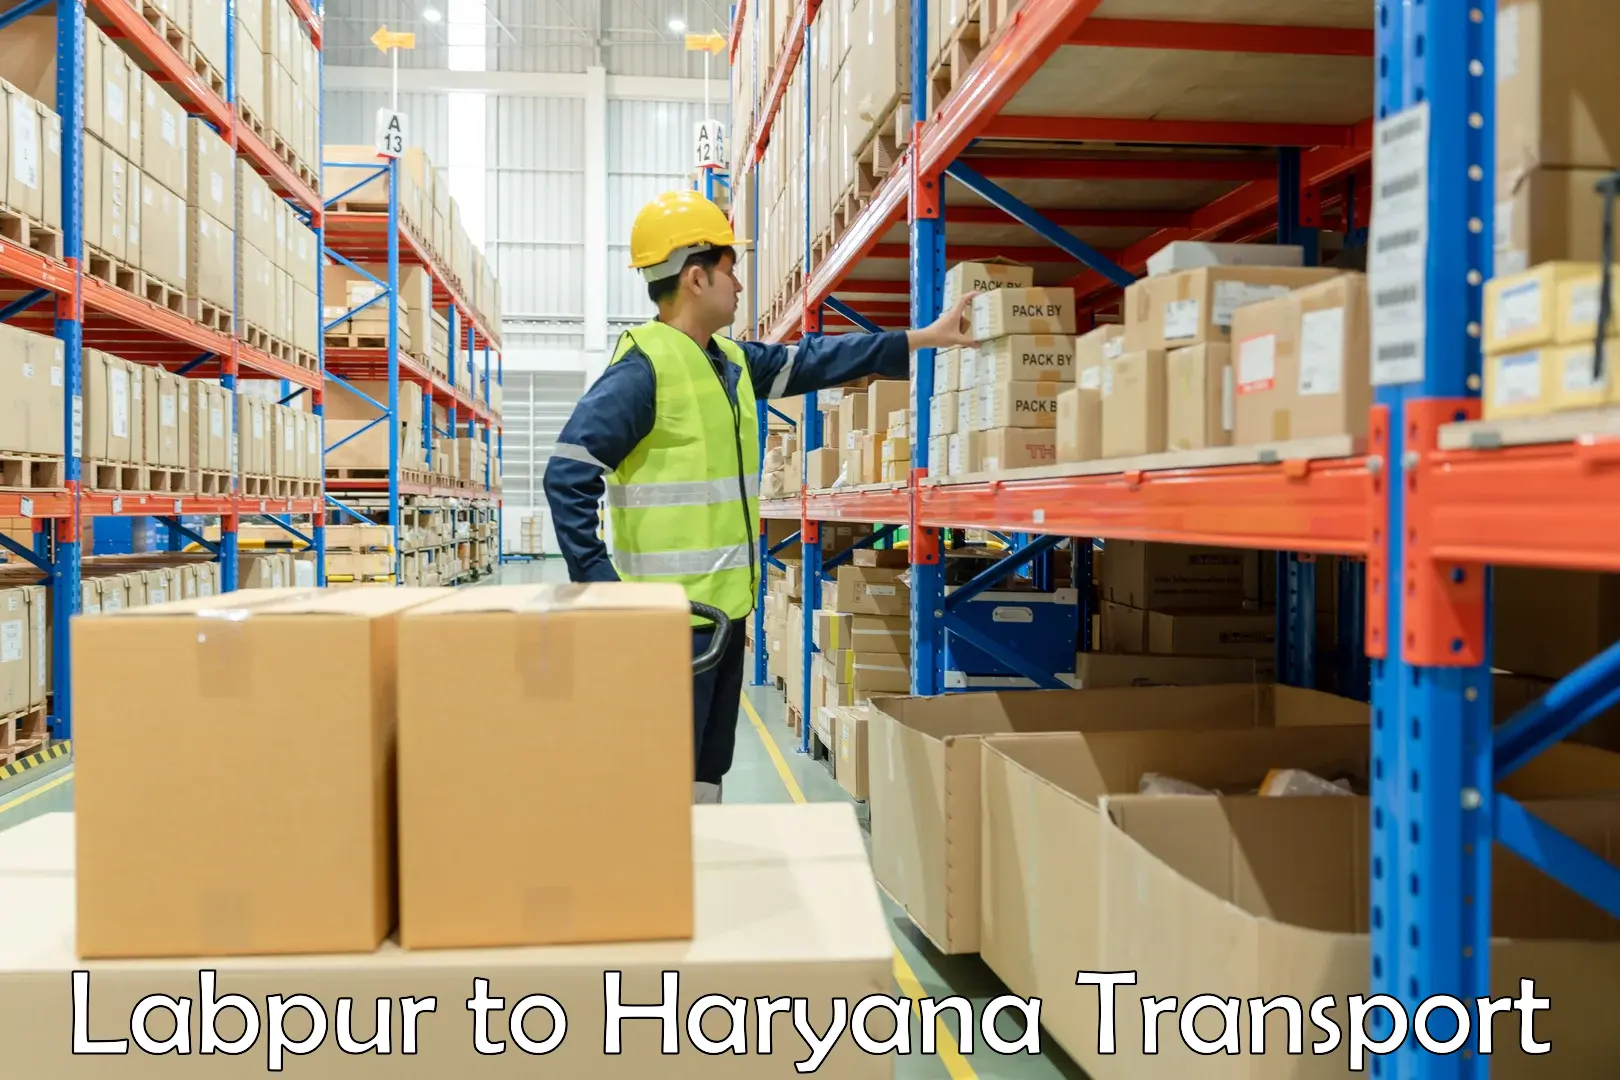 Commercial transport service Labpur to NCR Haryana